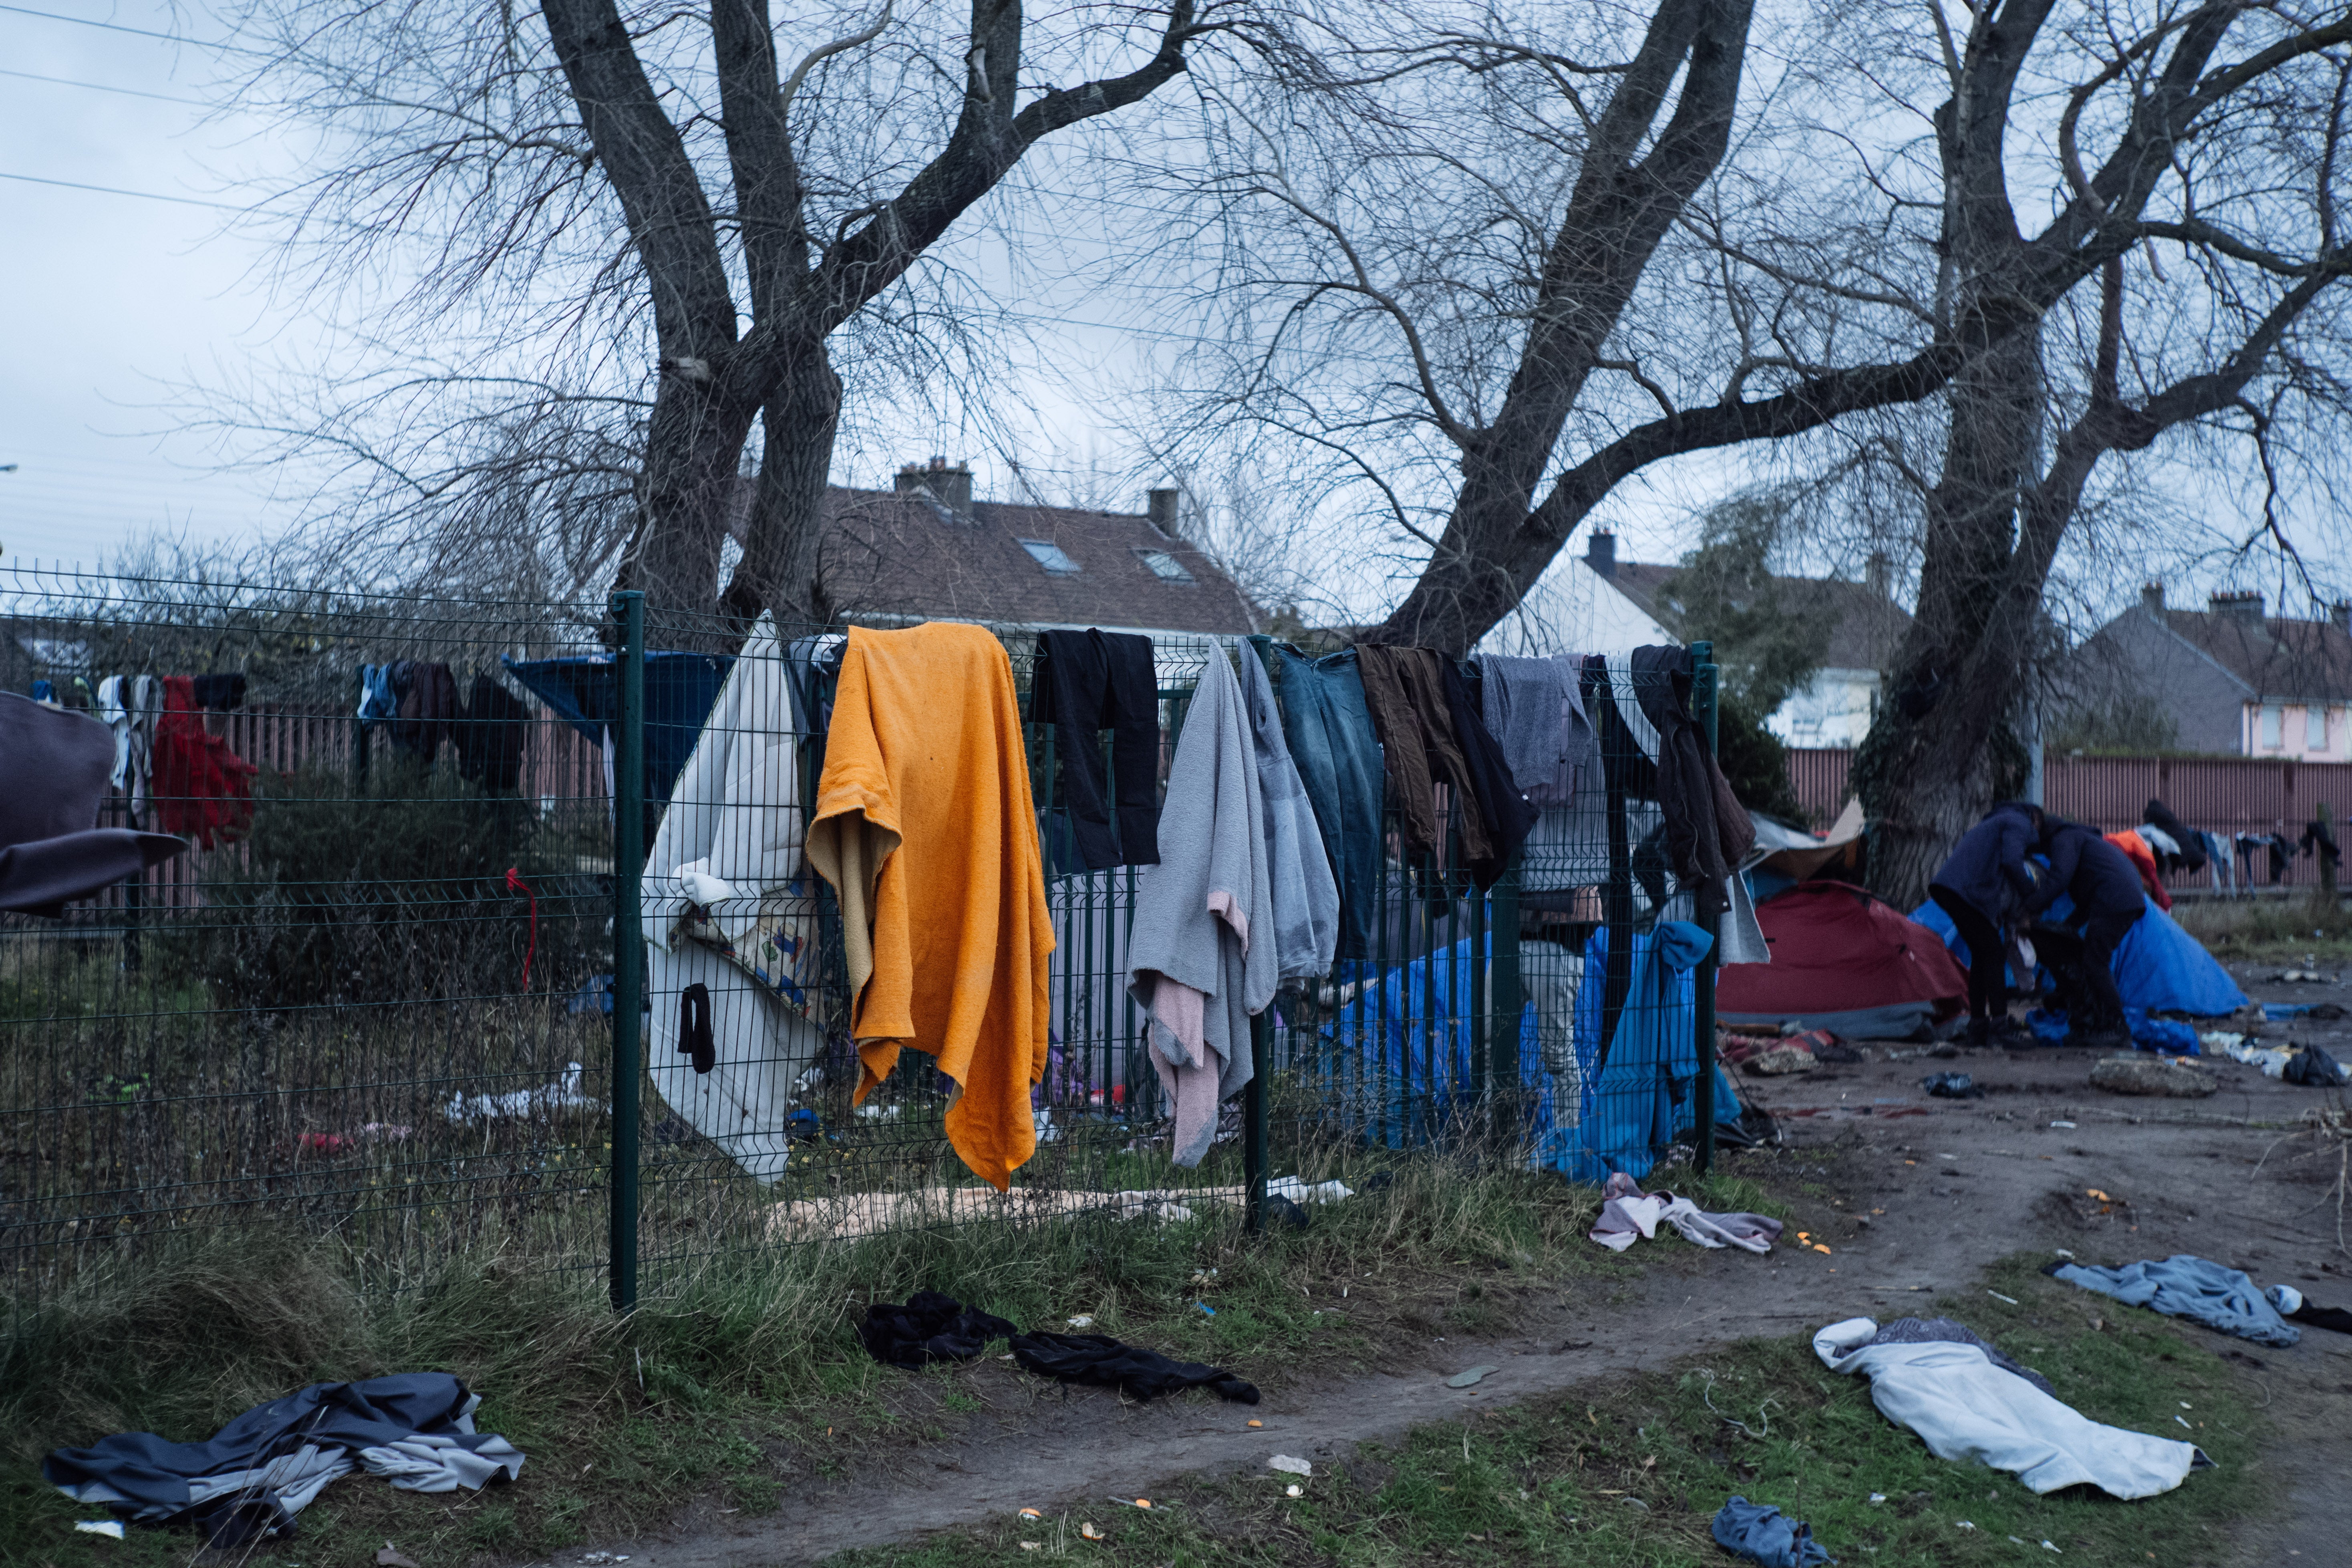 Three hundred unaccompanied children are among those currently sleeping rough in Calais and Dunkirk, according to recent estimates